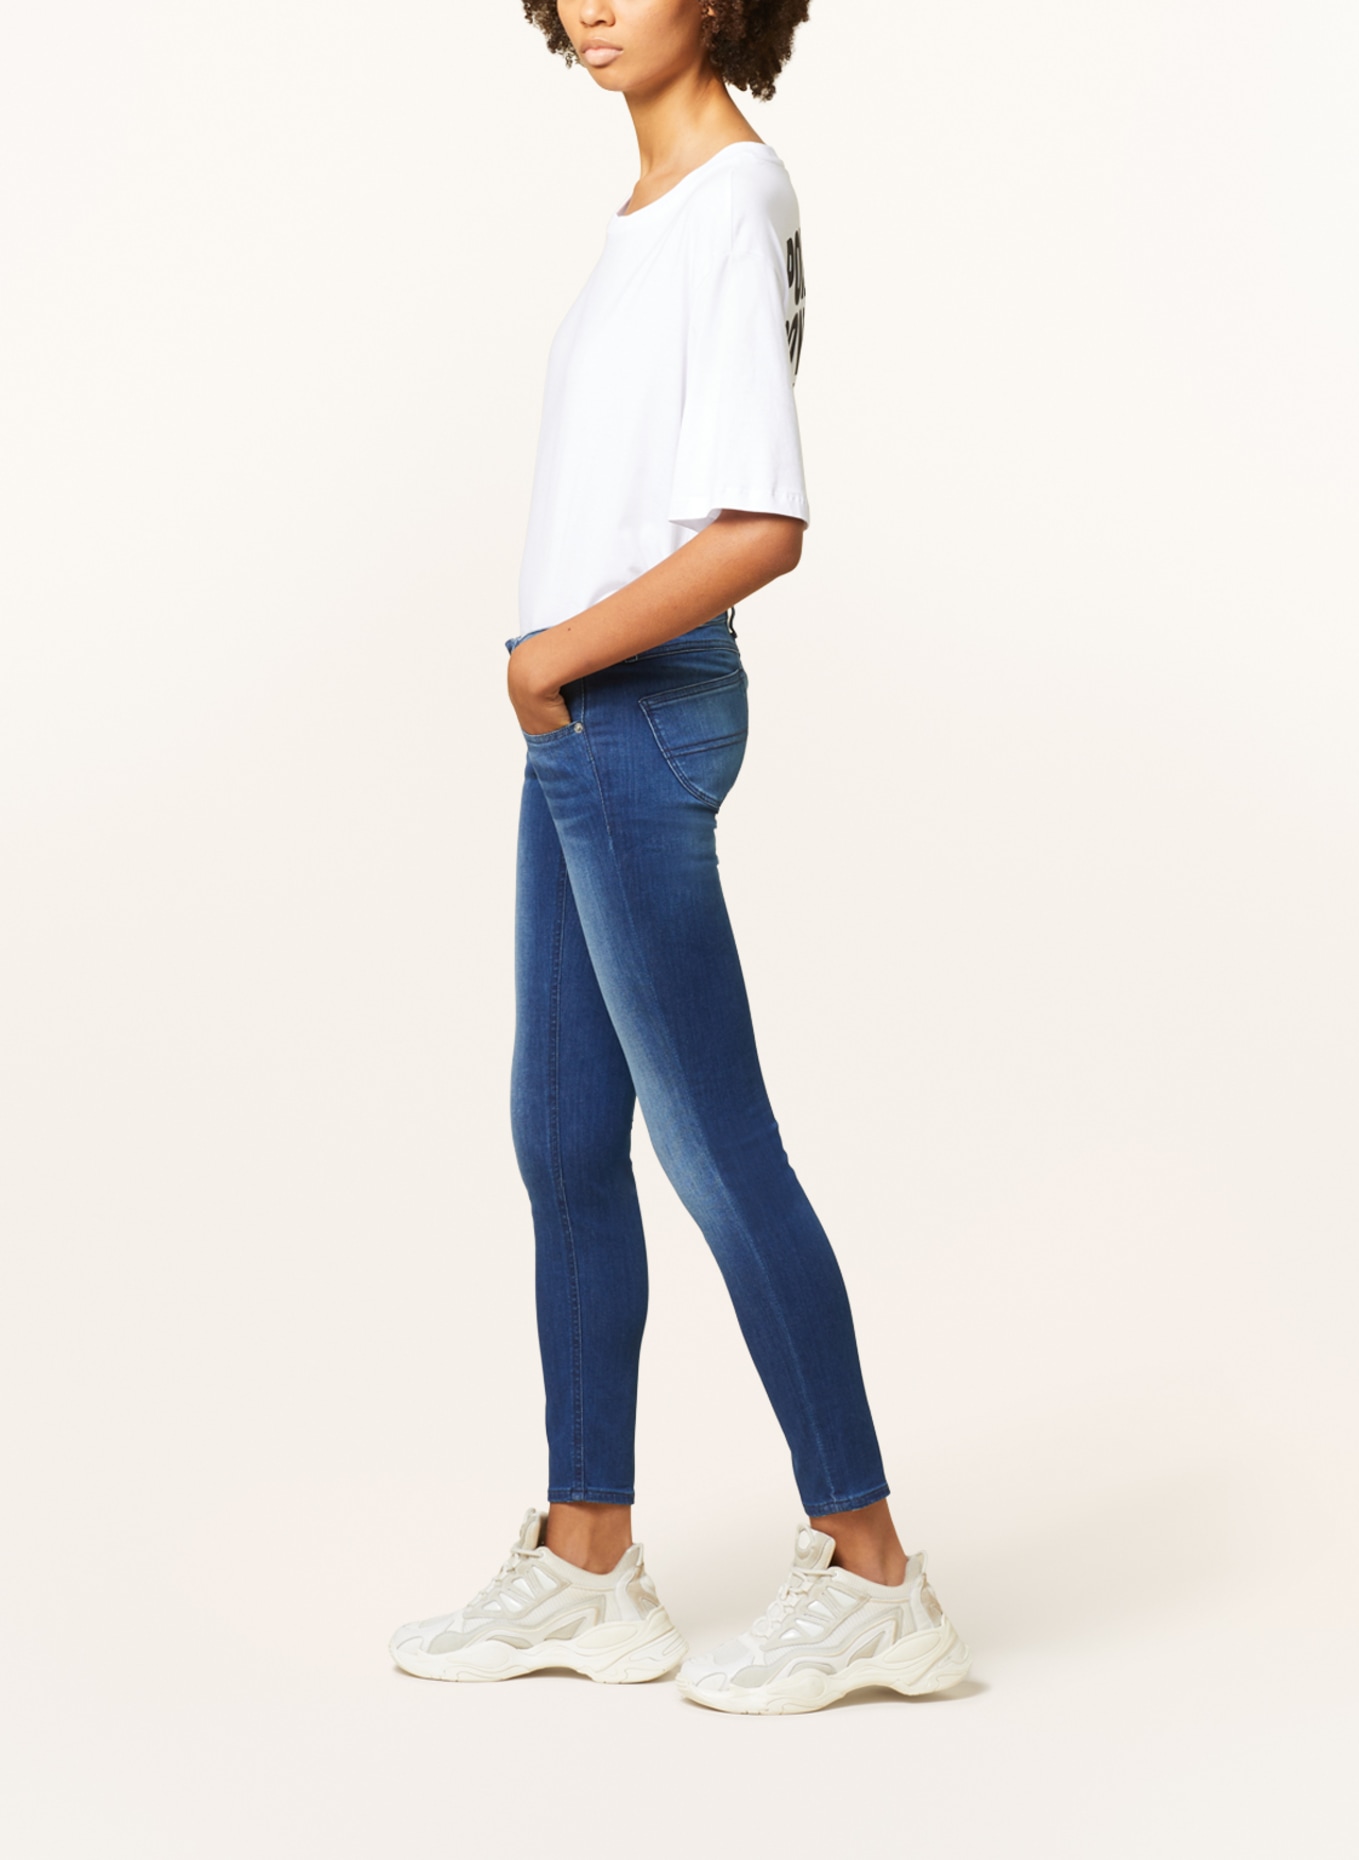 TOMMY JEANS Skinny Jeans SOPHIE, Farbe: 1A5 New Niceville Mid Blue Stretch (Bild 4)